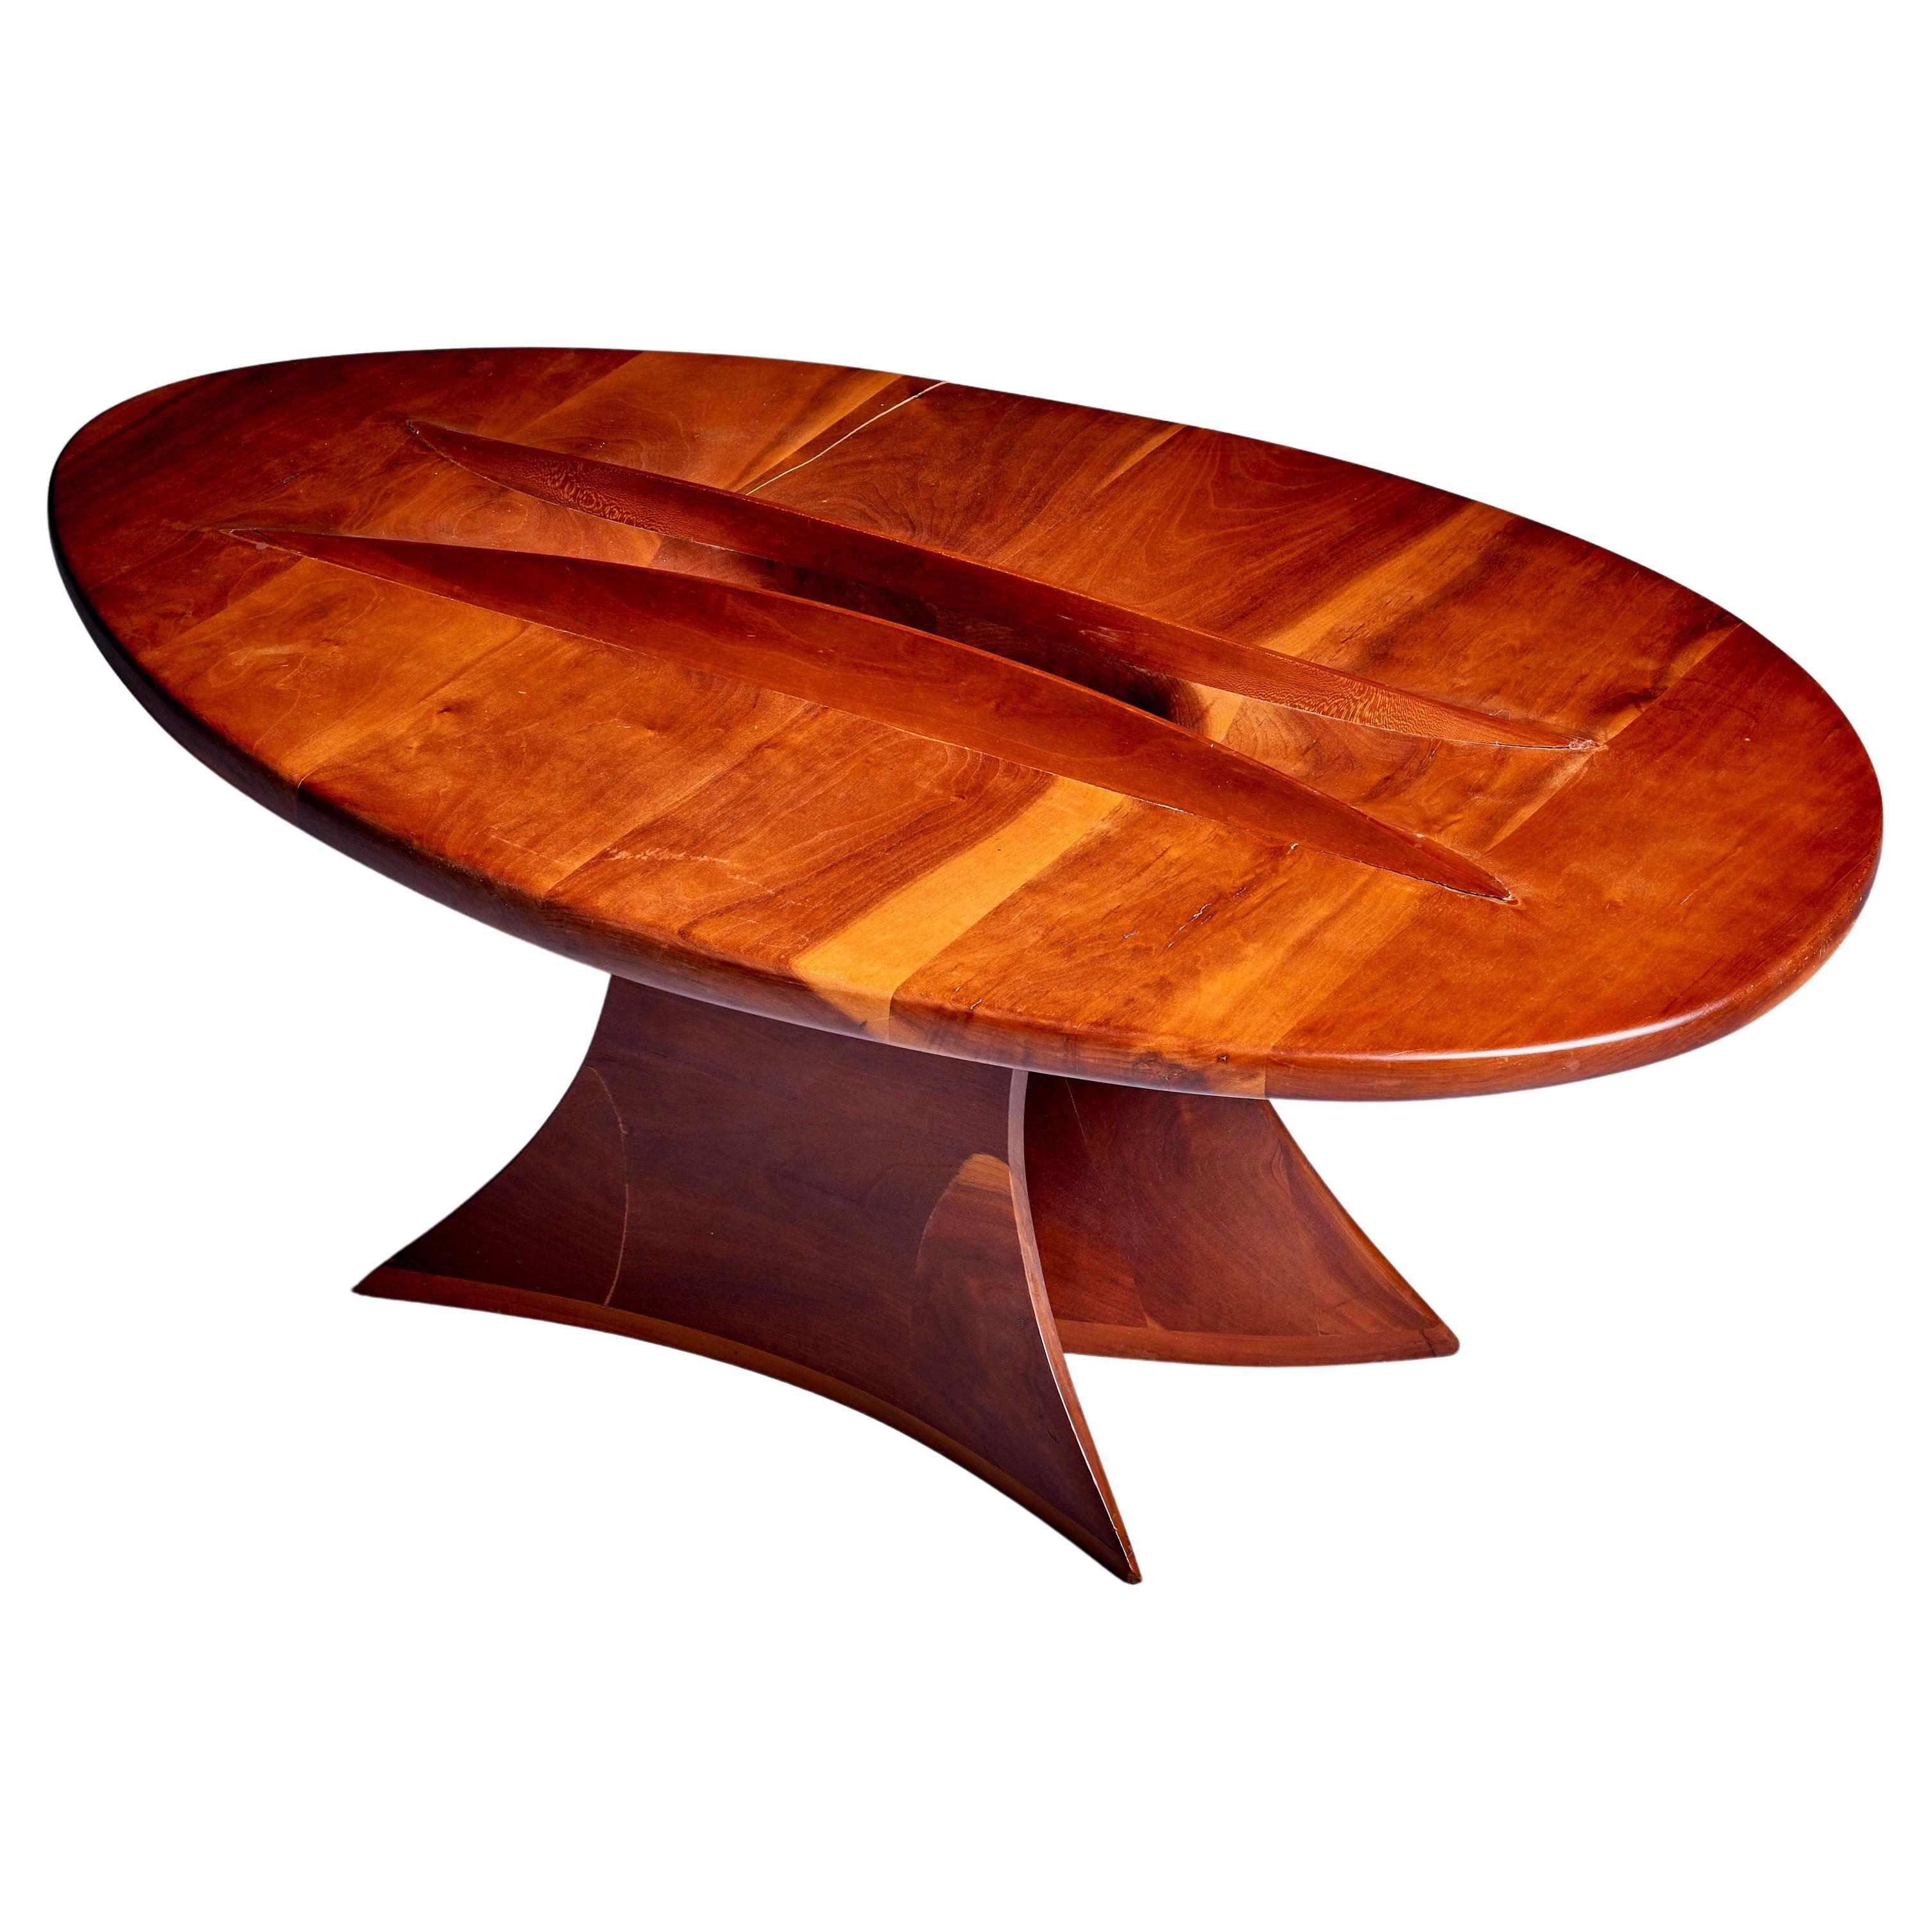 One of a Kind 1970s American Studio Free Form Coffee Table For Sale